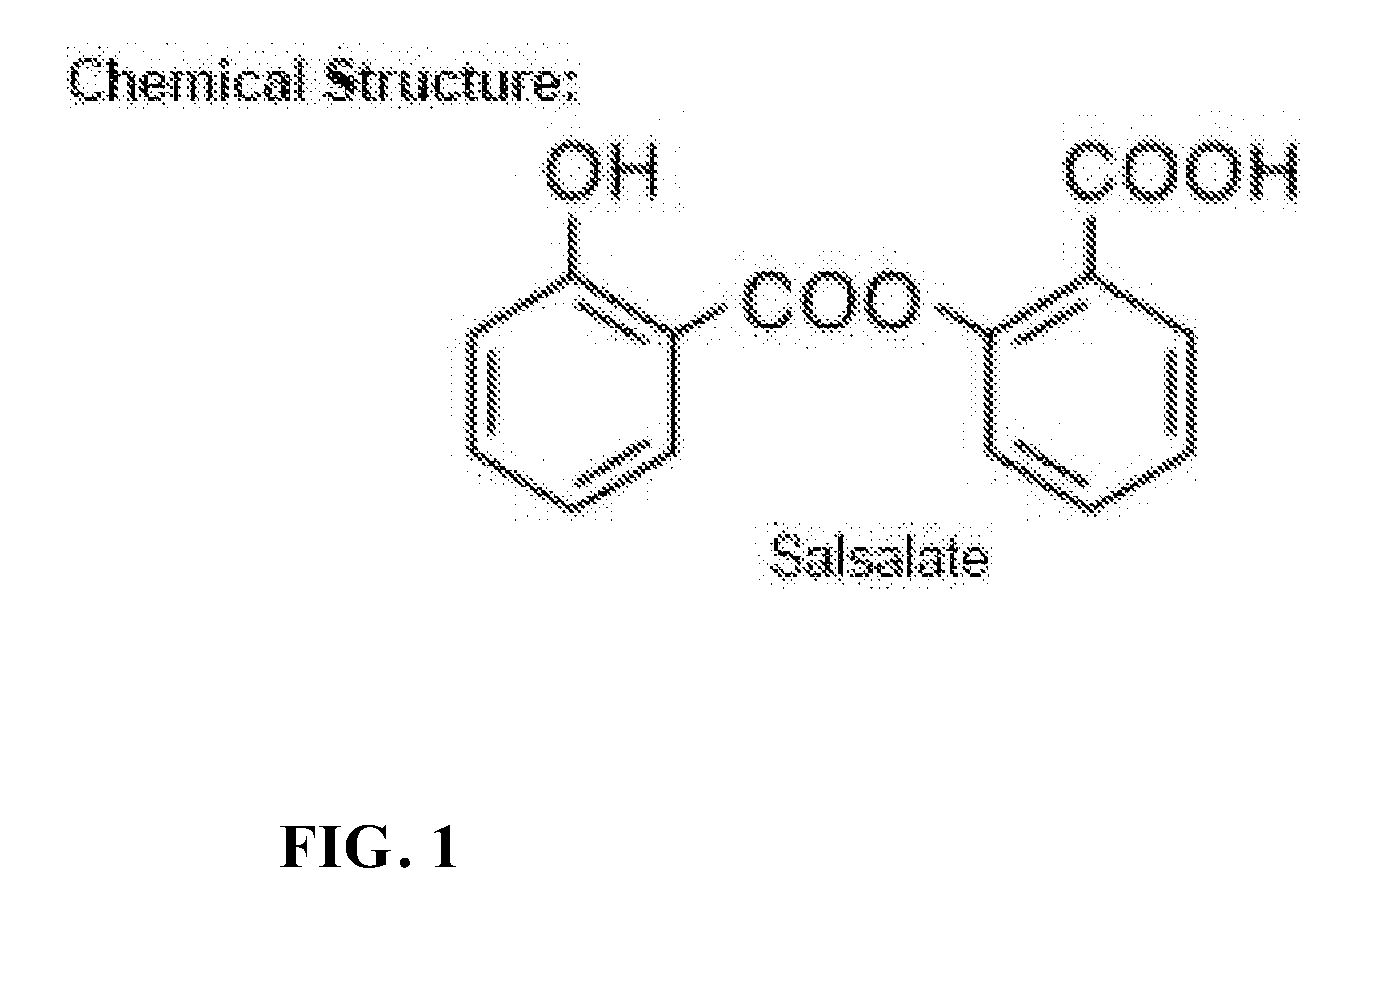 Use of salsalate with or without caffeine and with or without omega 3, and other pharmaceutical compounds in a distinctively unique nano-particulate capsule and tablet